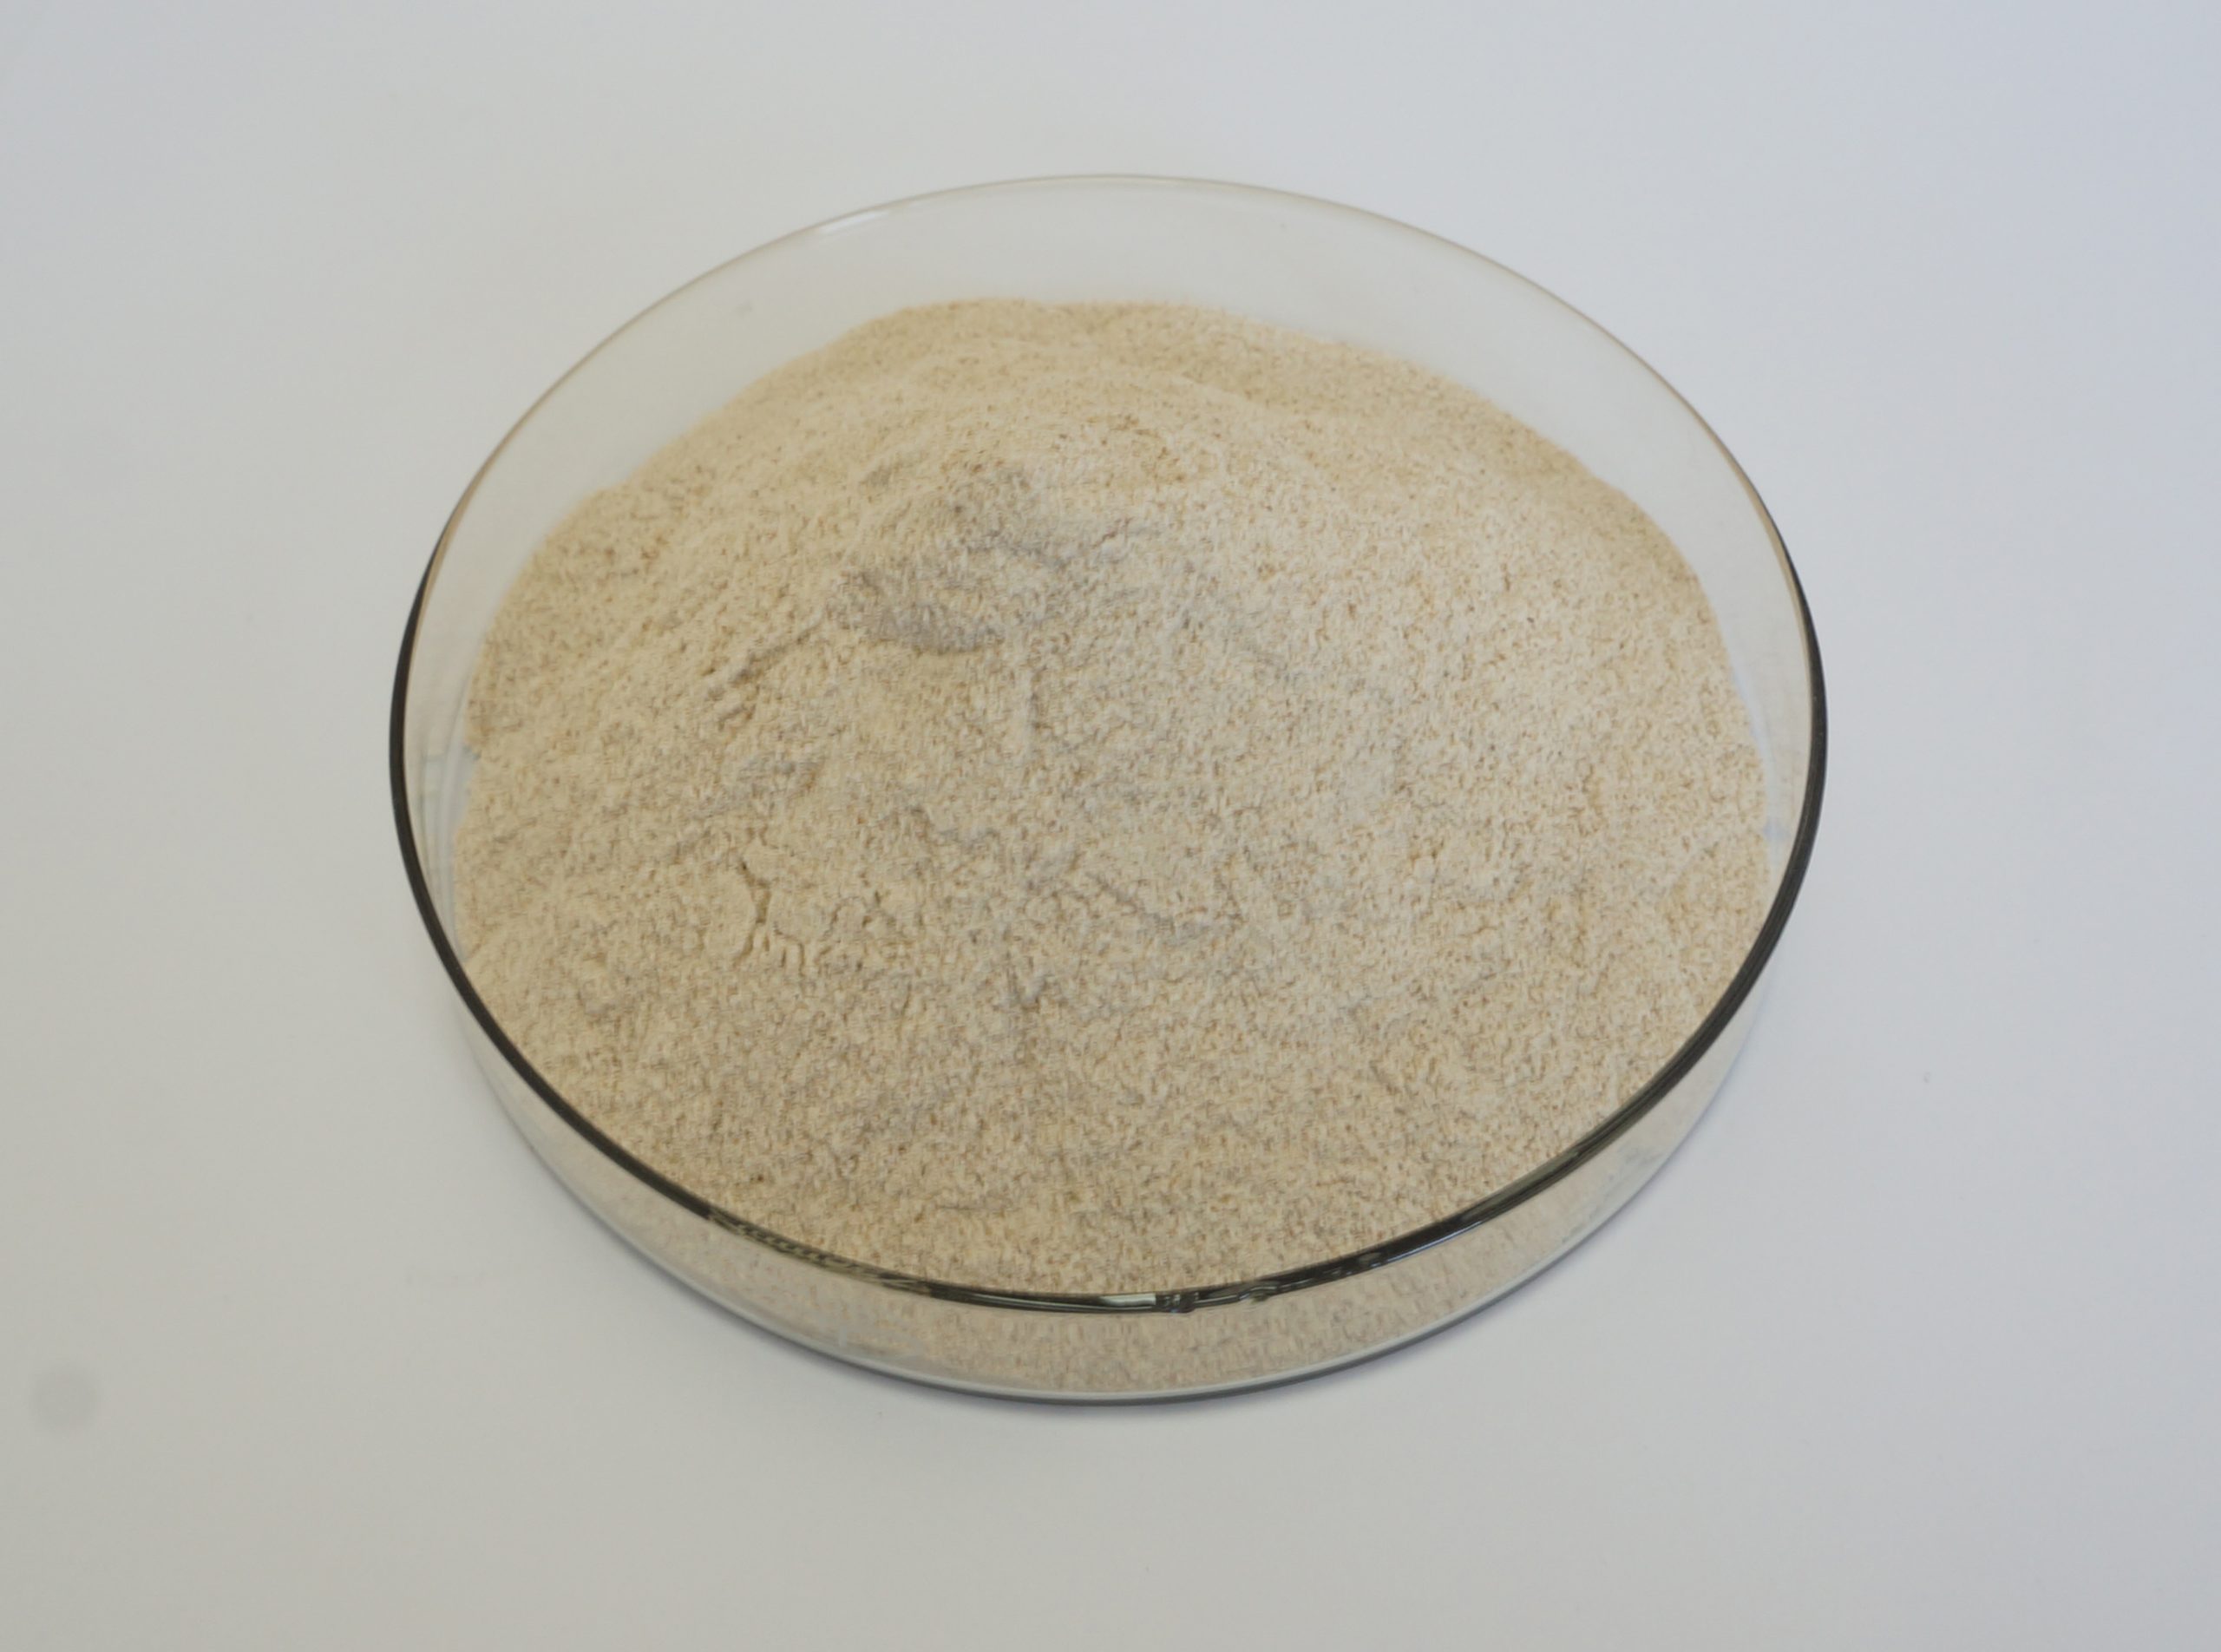 The application of Protease-Xi'an Lyphar Biotech Co., Ltd